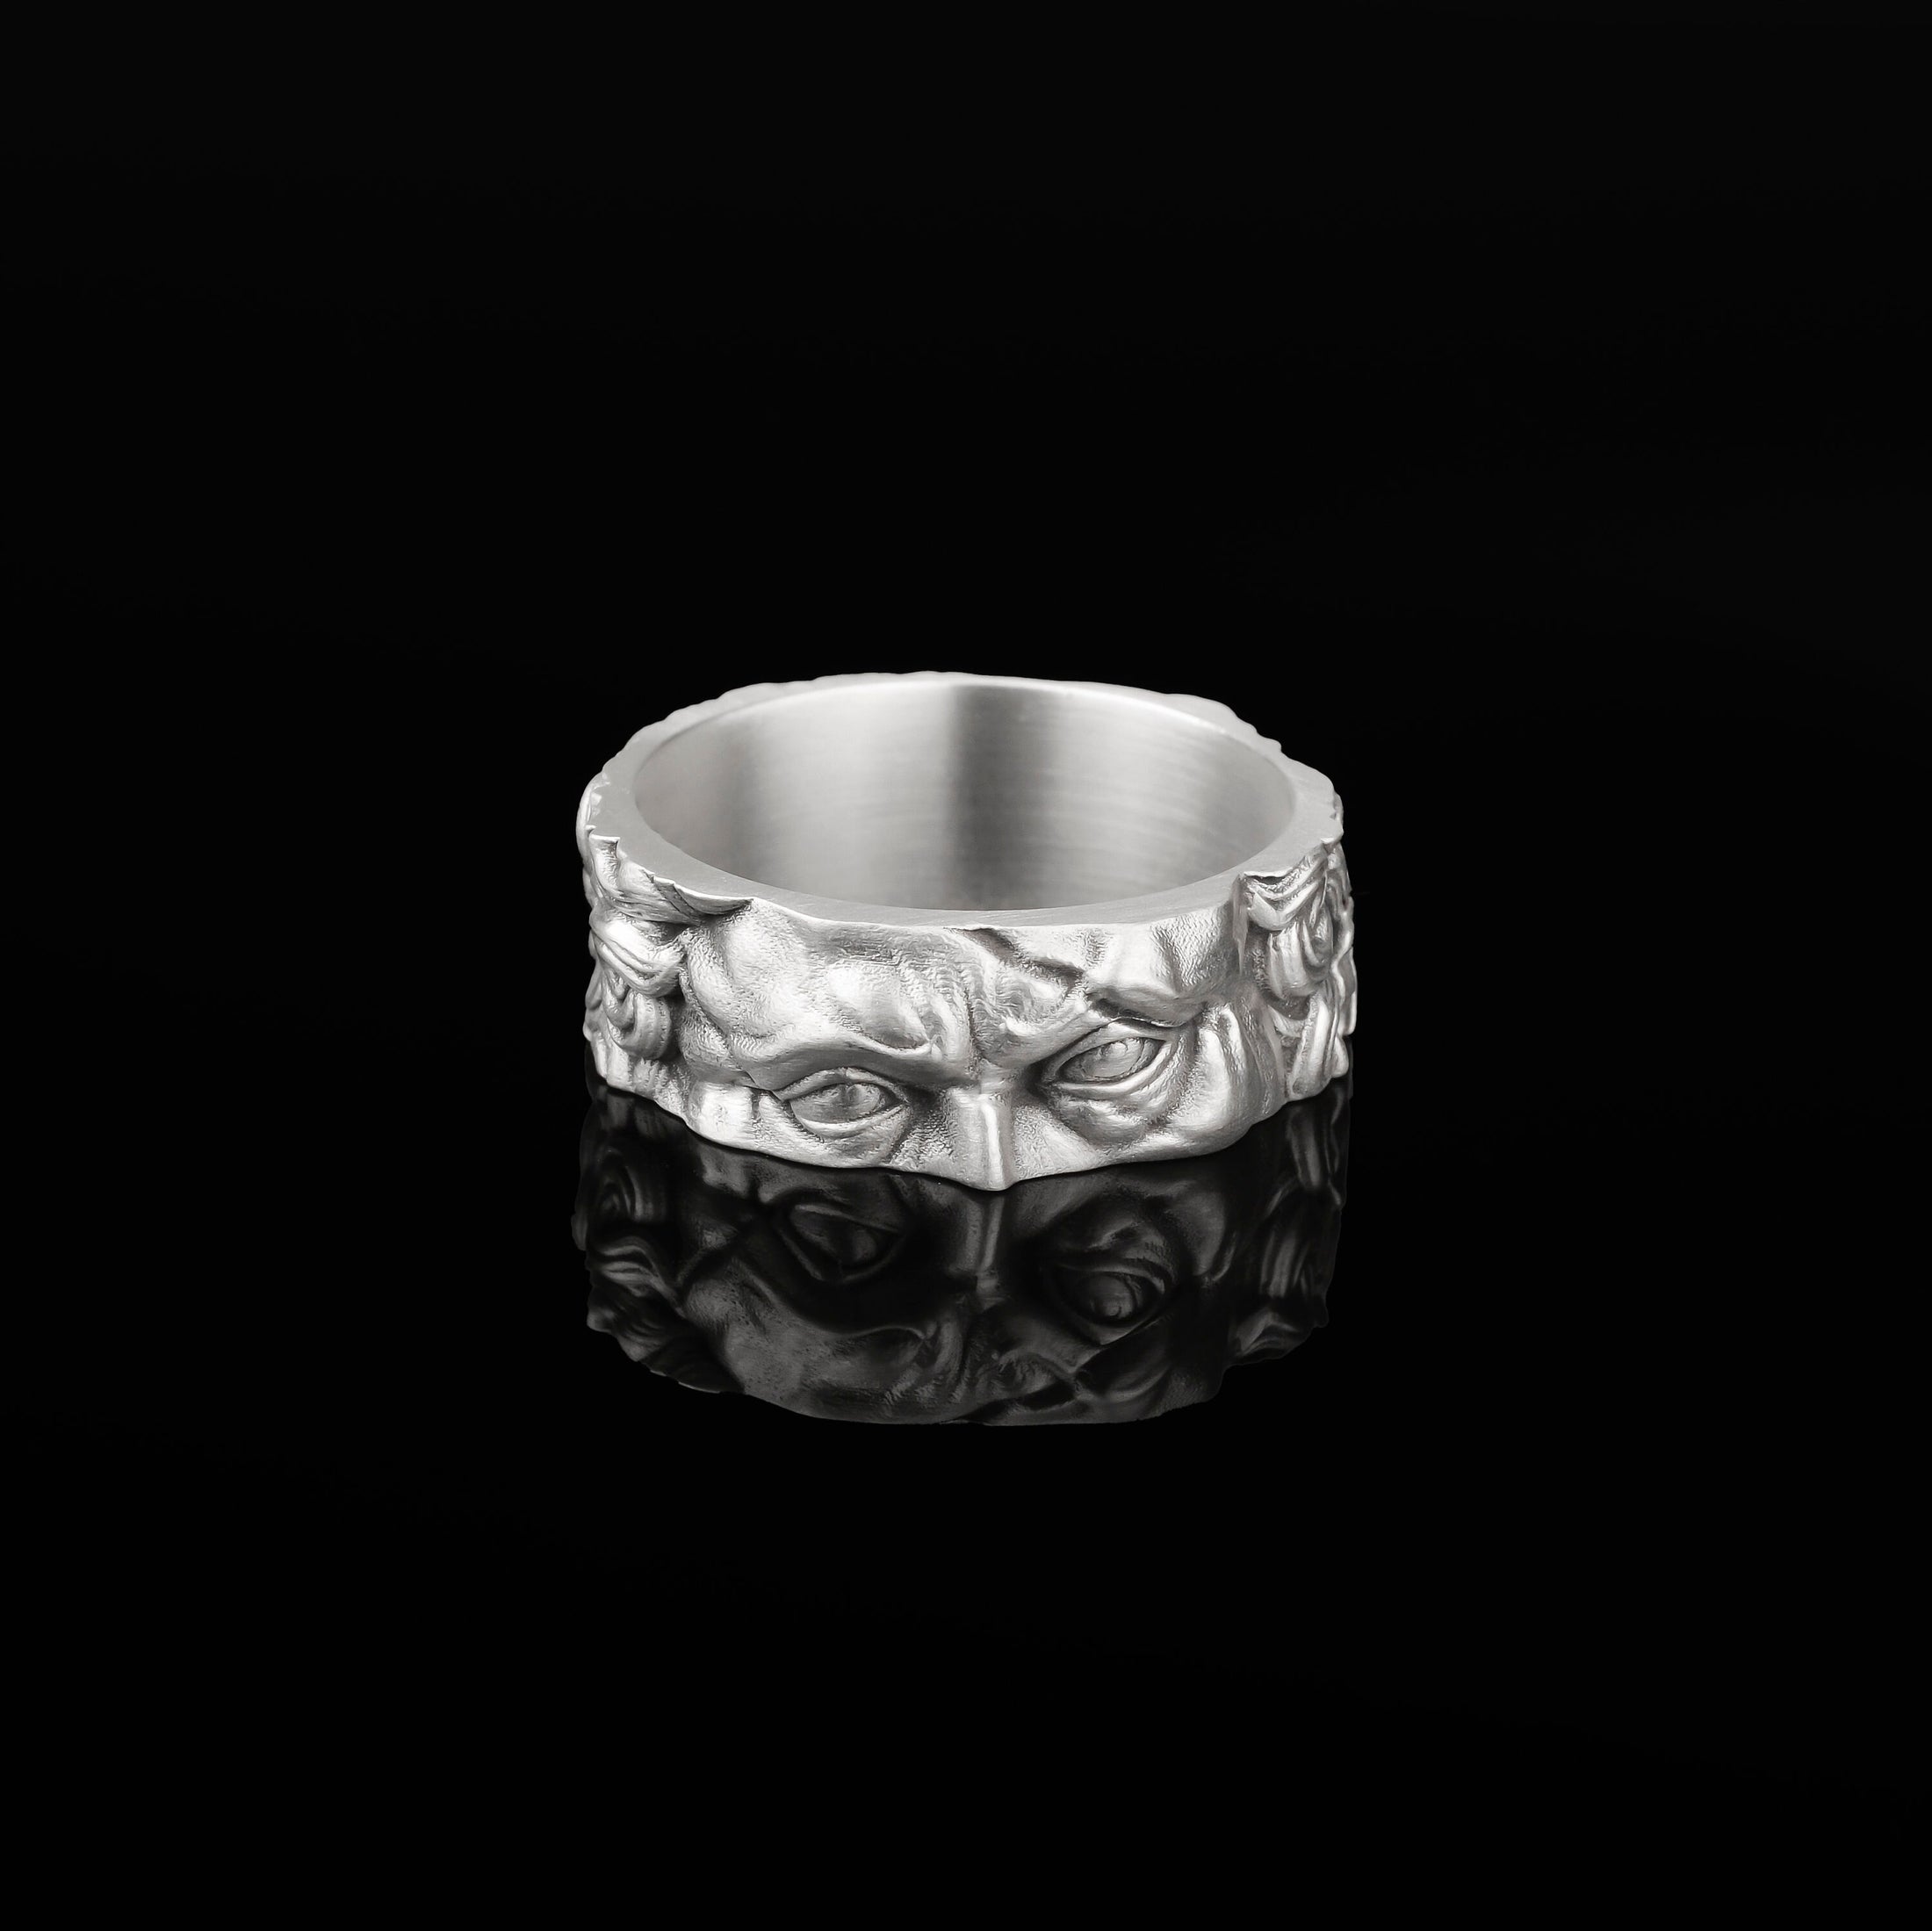 Michelagelo's Moses Band - Engravable Oxidized Finish